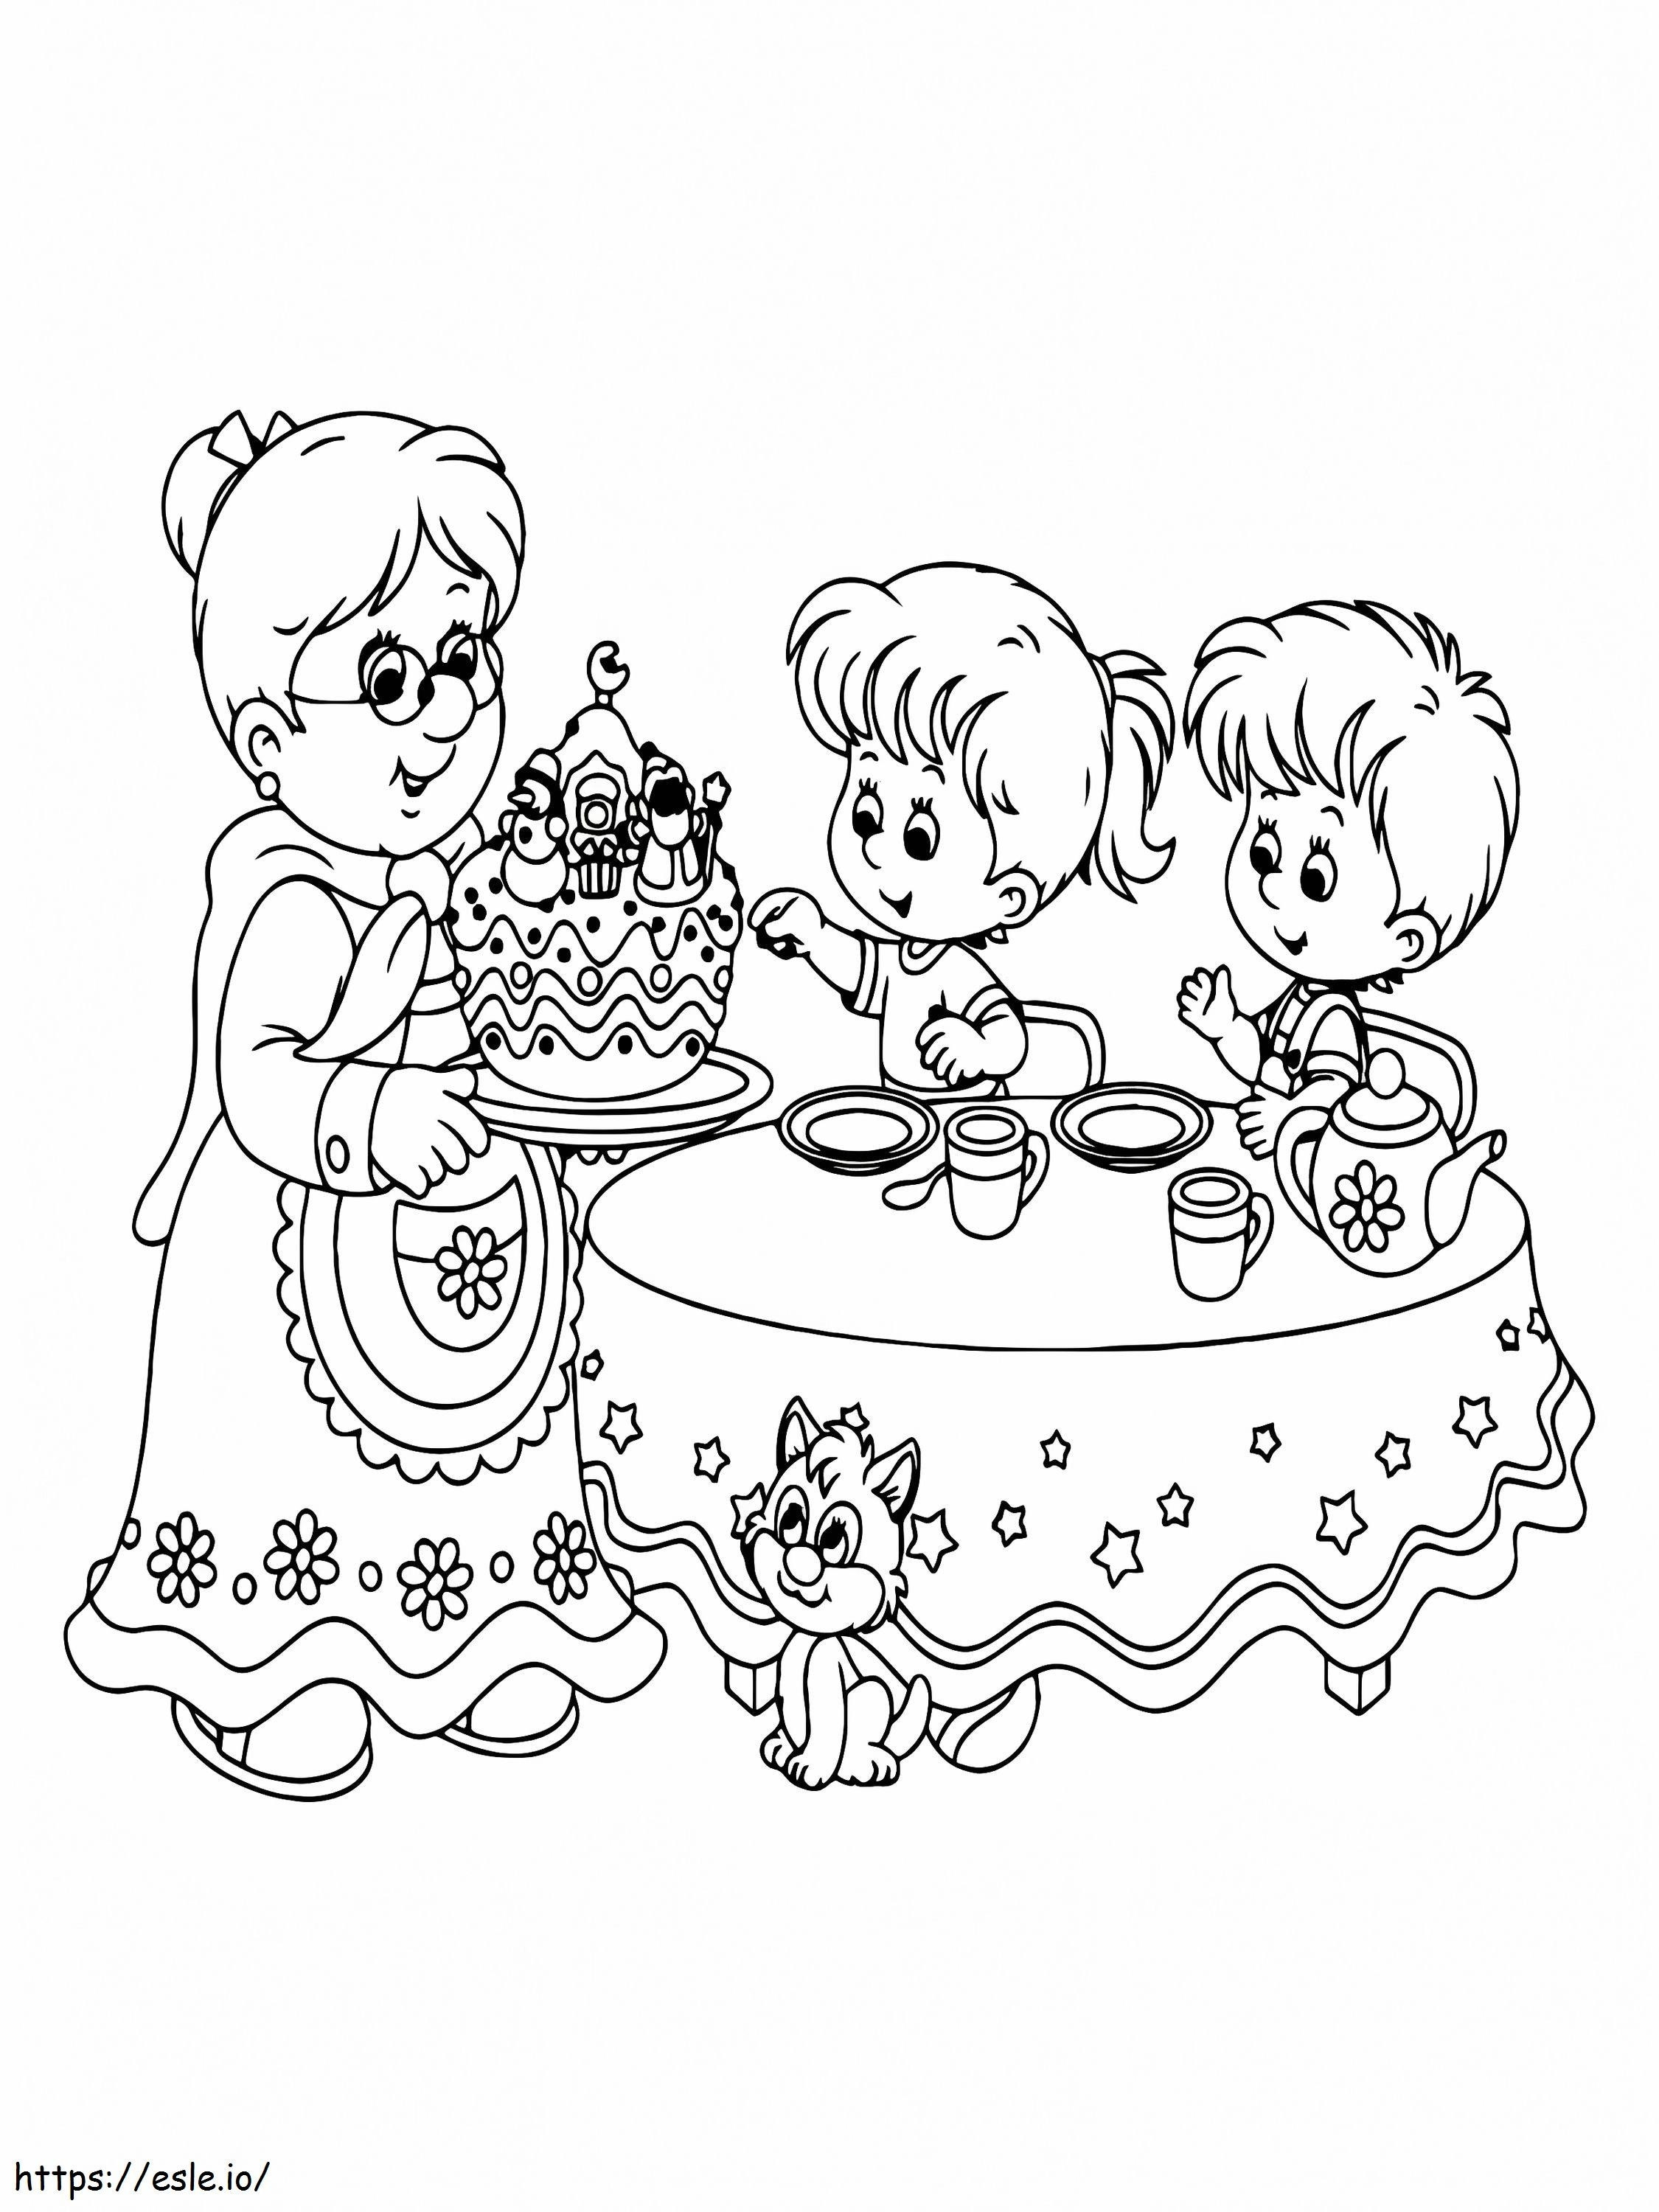 Happy Grandma And Children coloring page